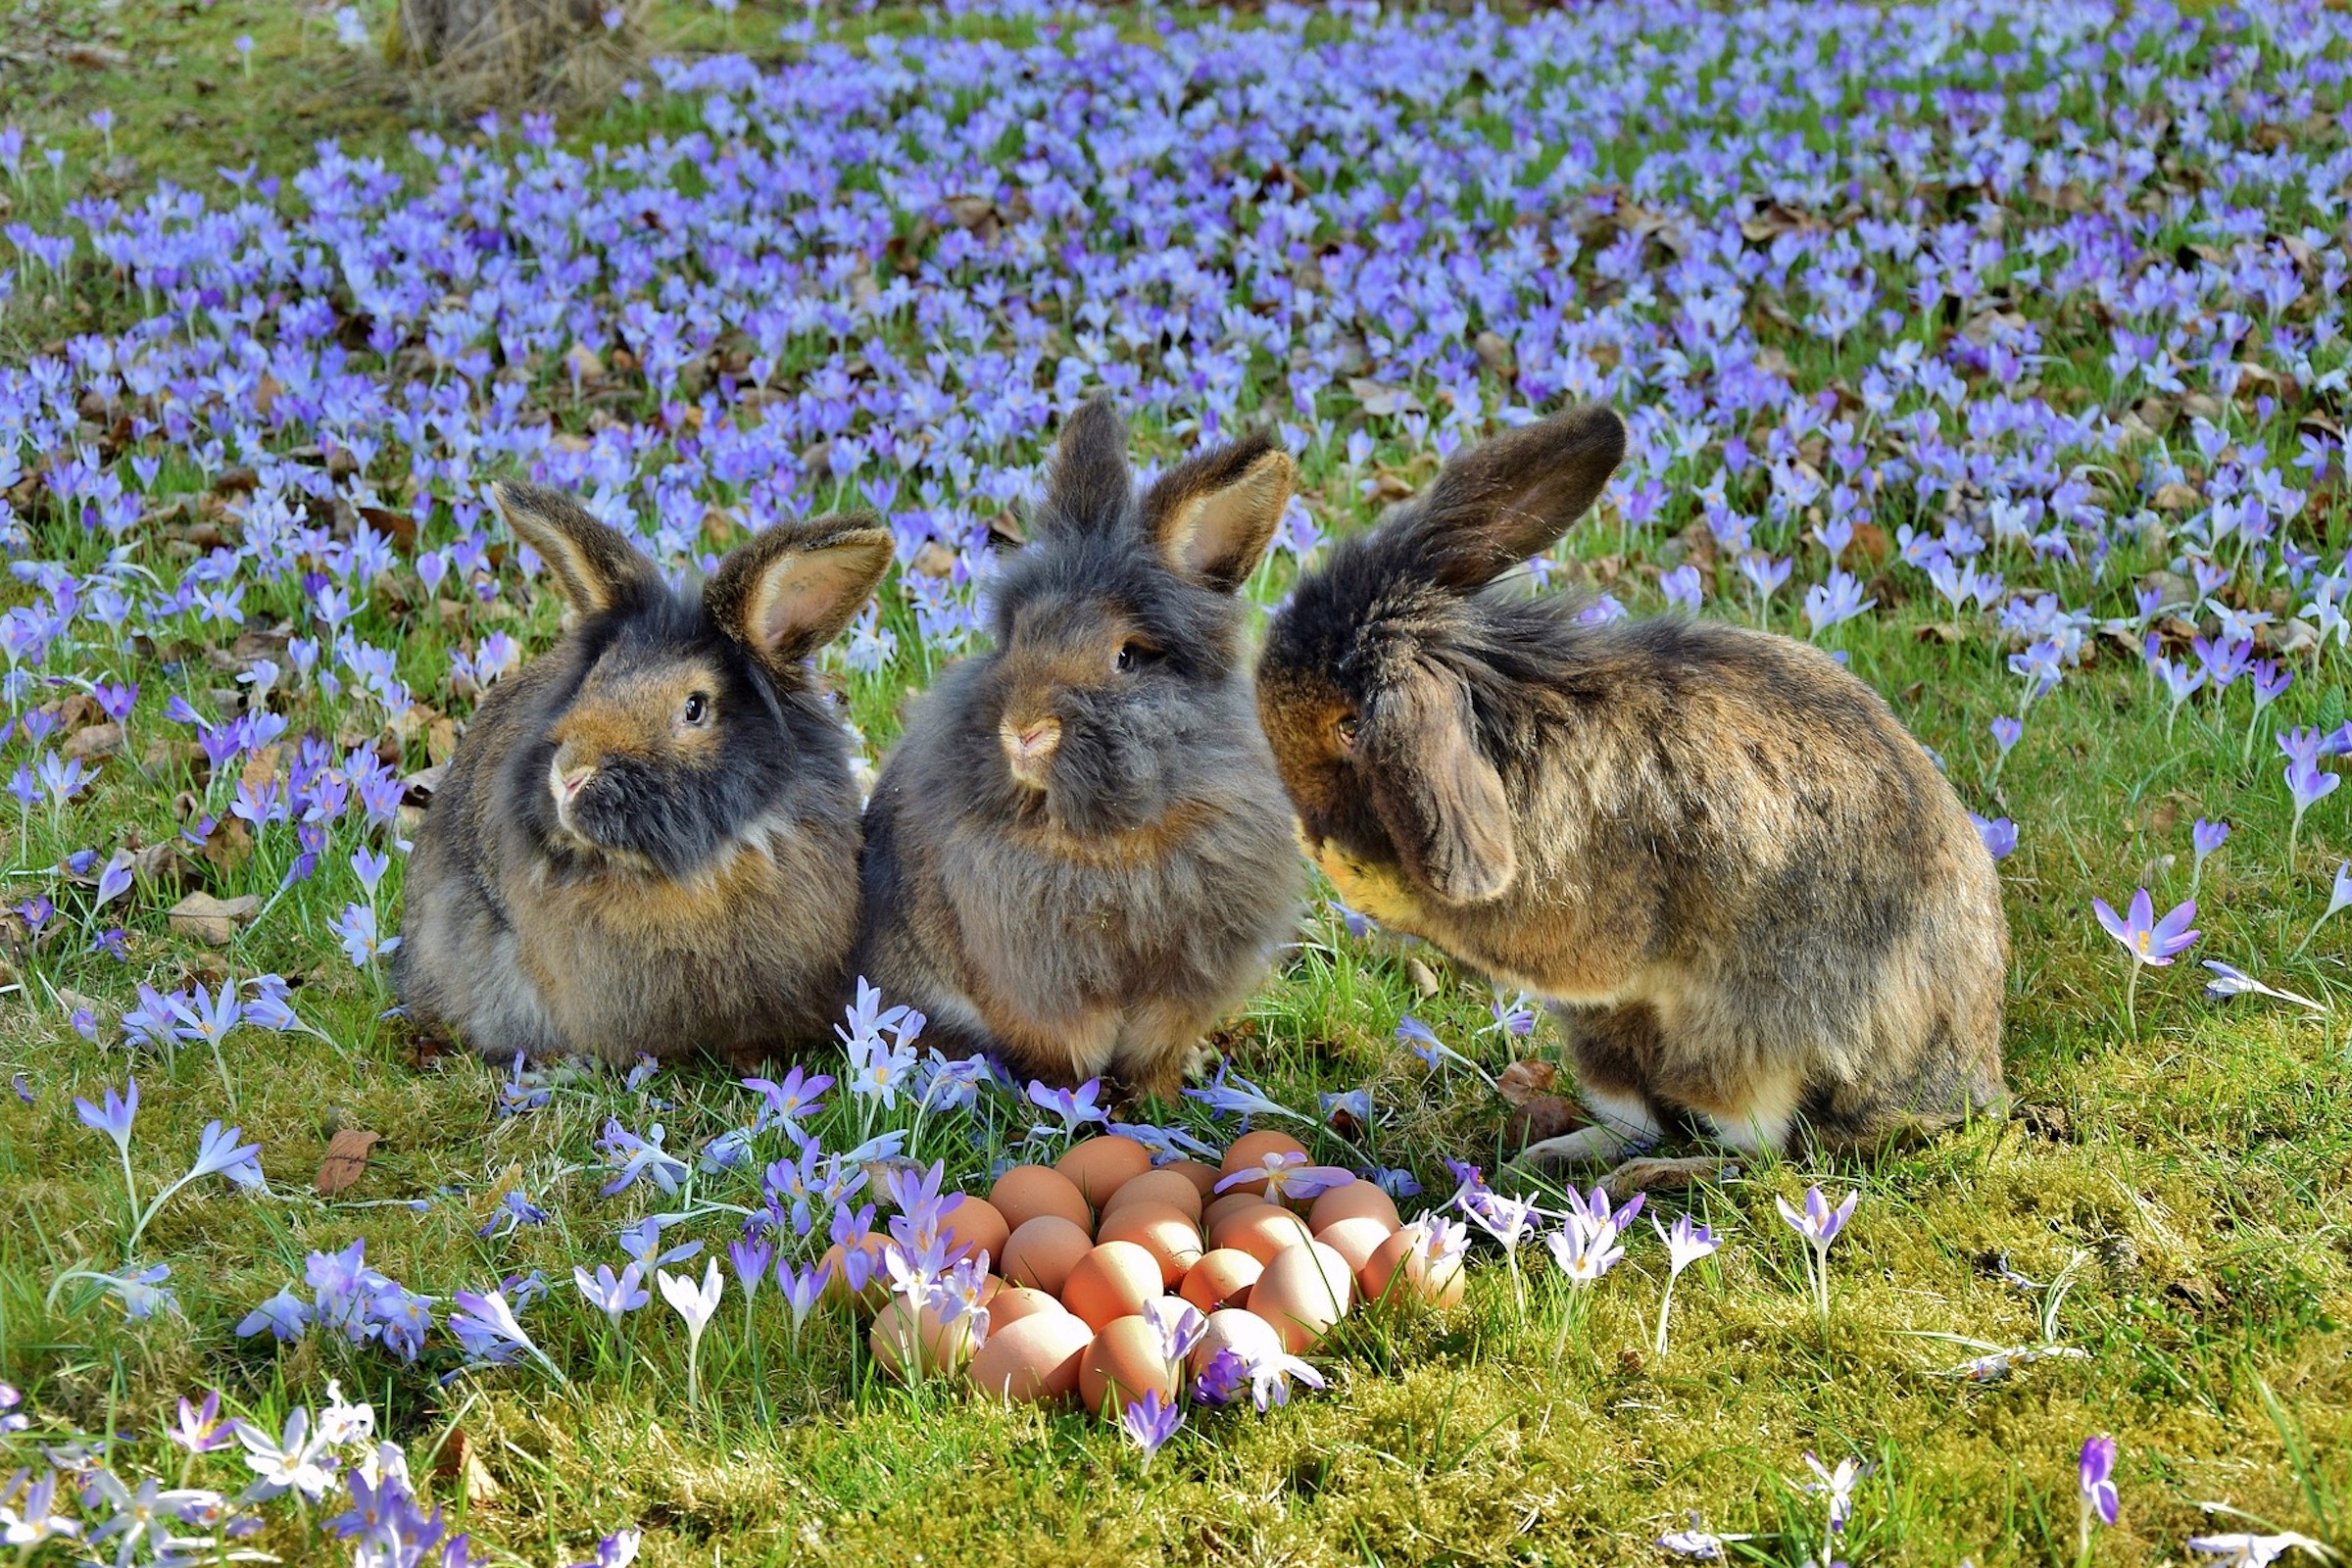 Three rabbits sit in a field of blue flowers around a pile of brown eggs